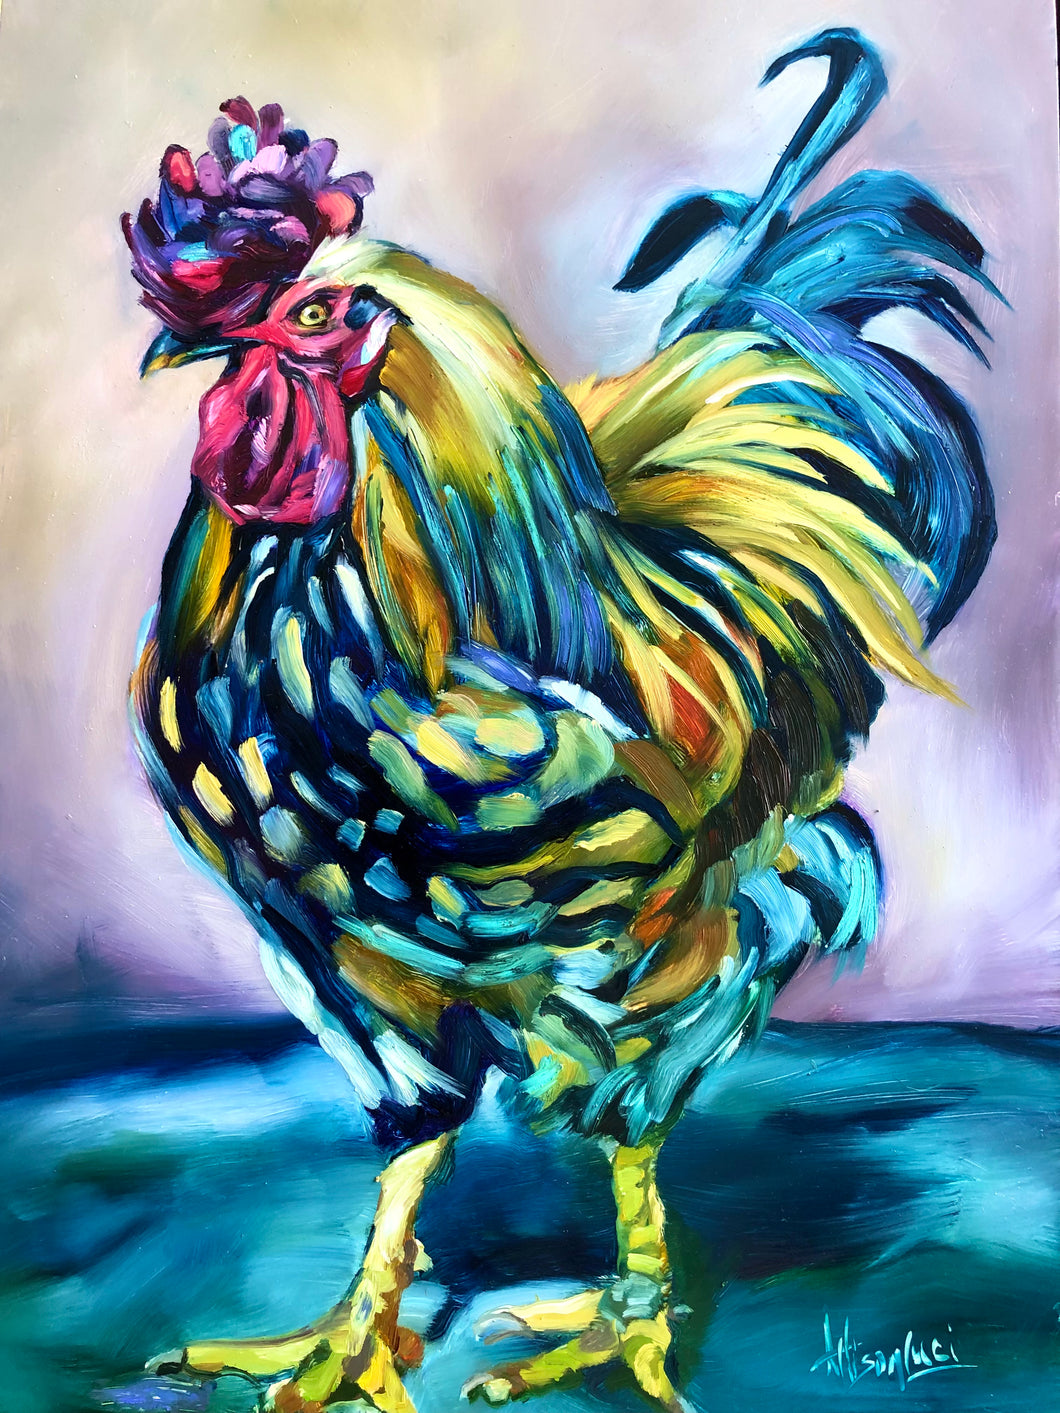 Helene, the Chicken Queen Original Oil Painting 12” x 16” on Cradled Gessoboard